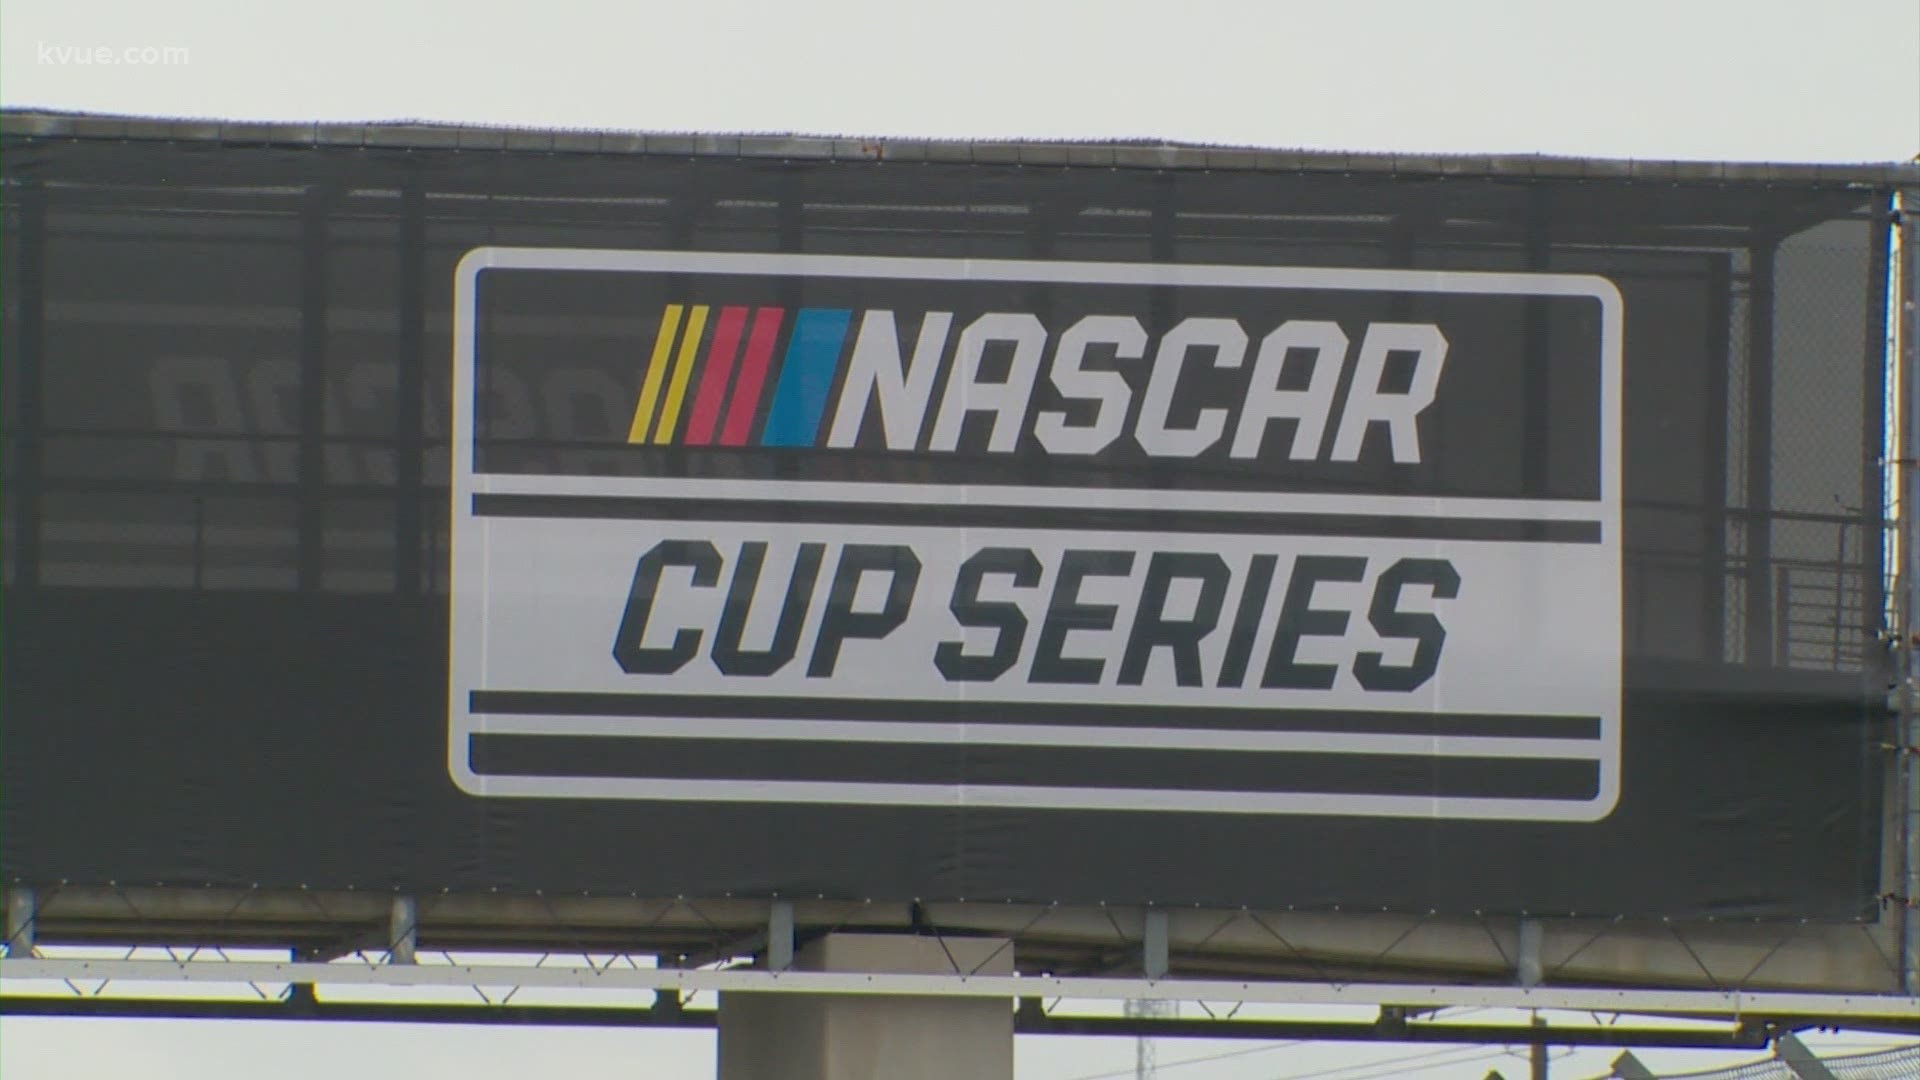 It's the first time ever NASCAR will burn rubber at the Circuit of the Americas.